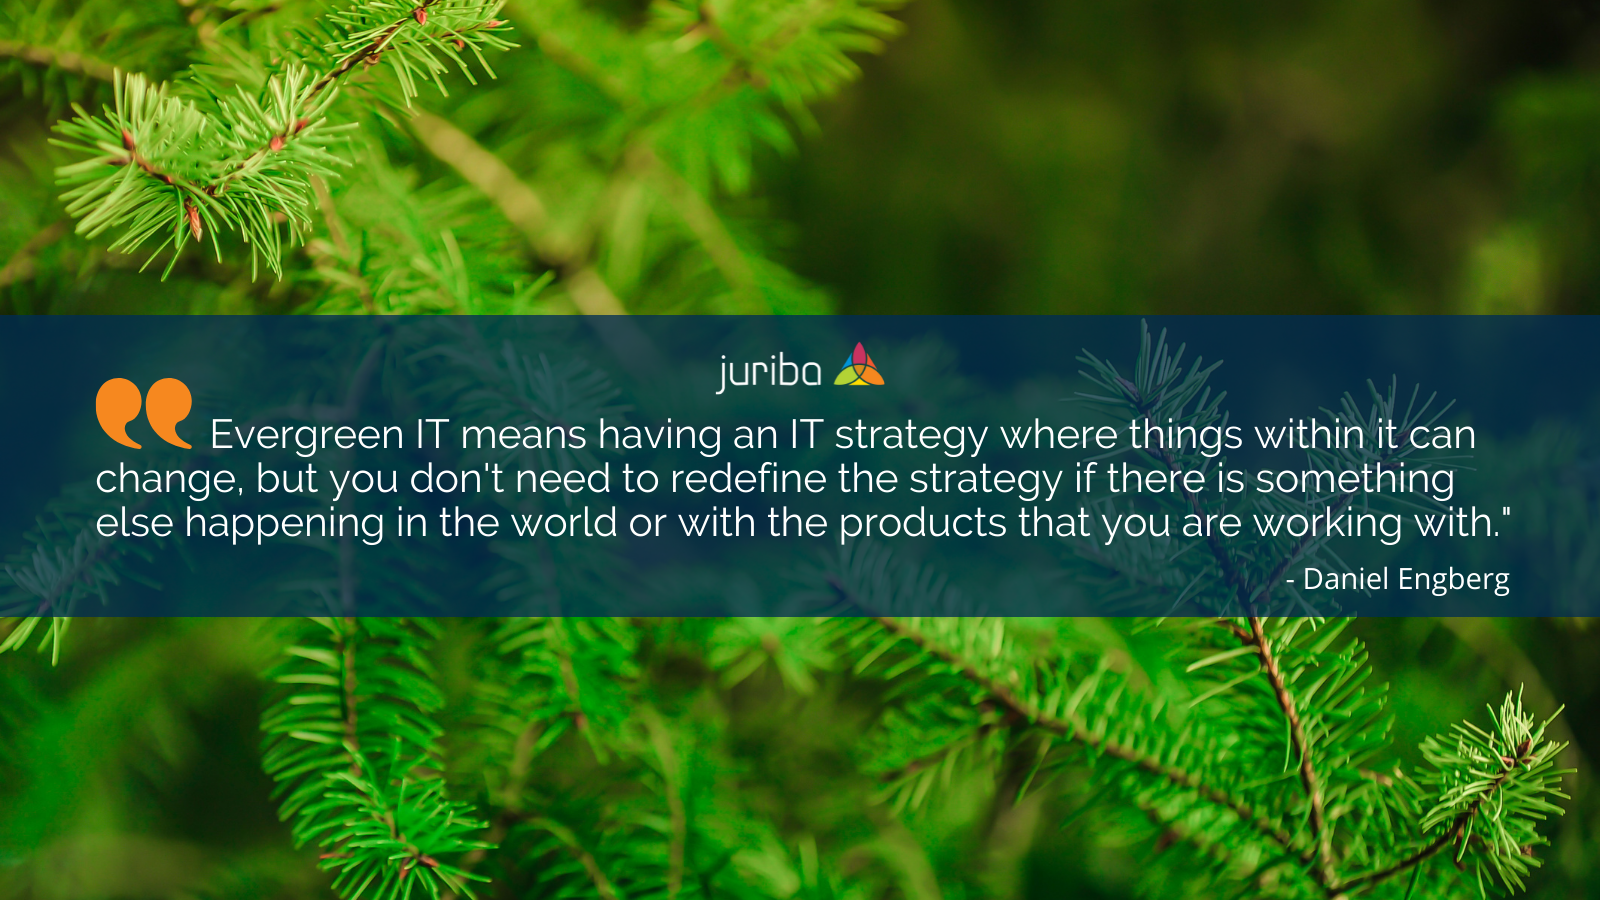 Evergreen IT means having an IT strategy where things within it can change, but you dont need to redefine the strategy if there is something else happening in the world or with the products that you are working wi